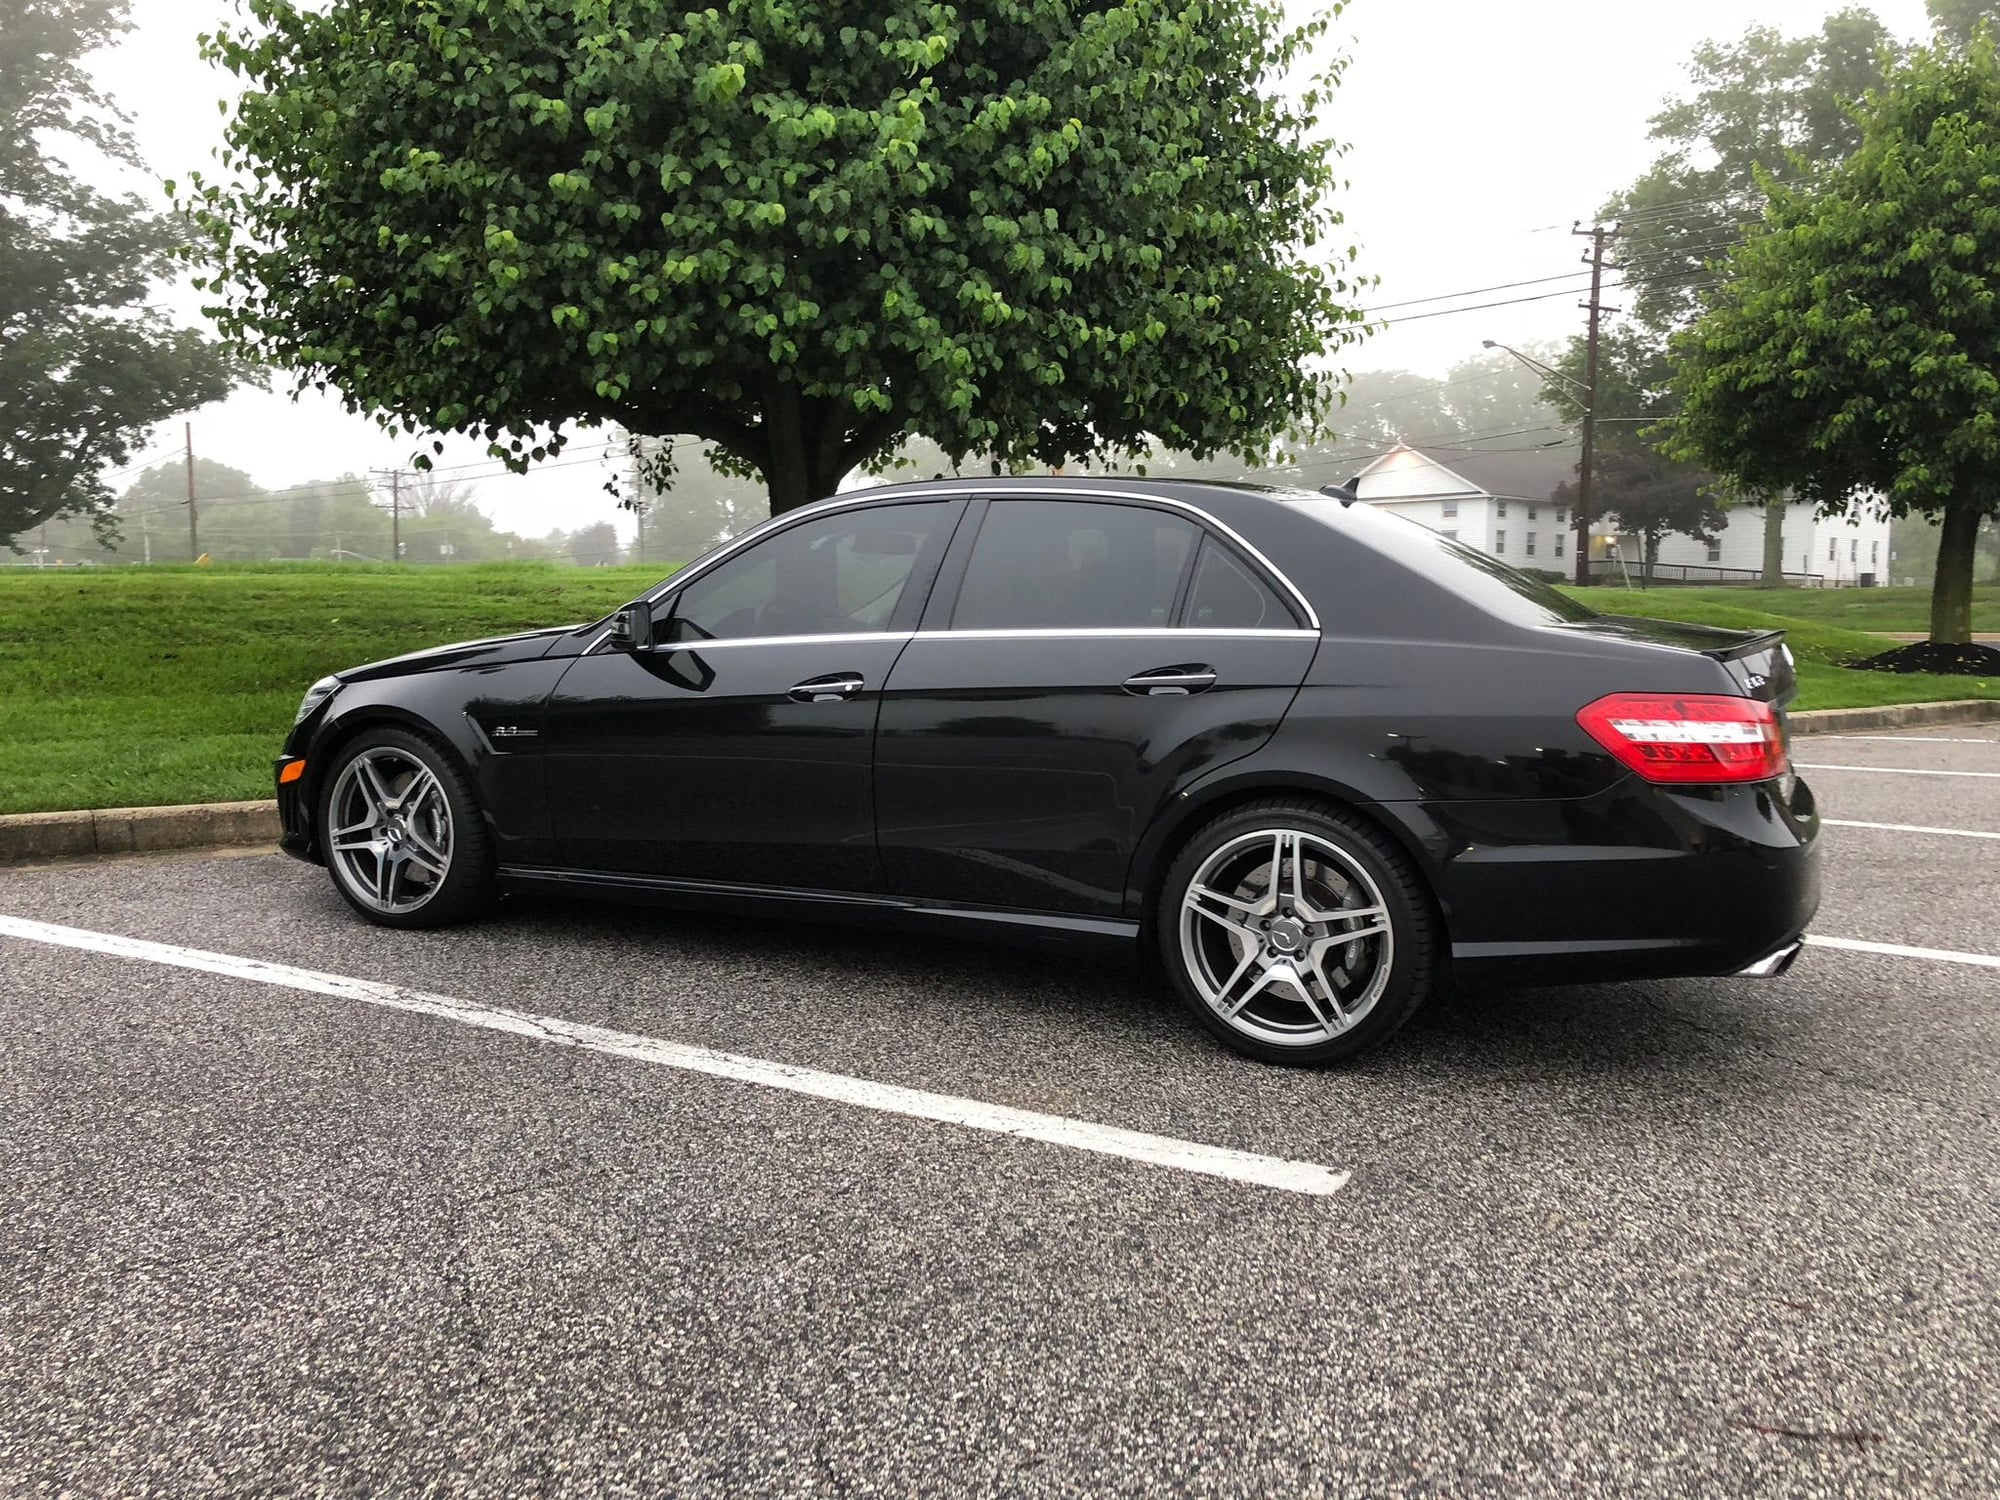 2010 Mercedes-Benz E63 AMG - 2010 E63 - adult owned, responsibly driven - Used - VIN WDDHF7HB0AA120219 - 90,000 Miles - 8 cyl - 2WD - Automatic - Sedan - Black - Churchville, MD 21028, United States